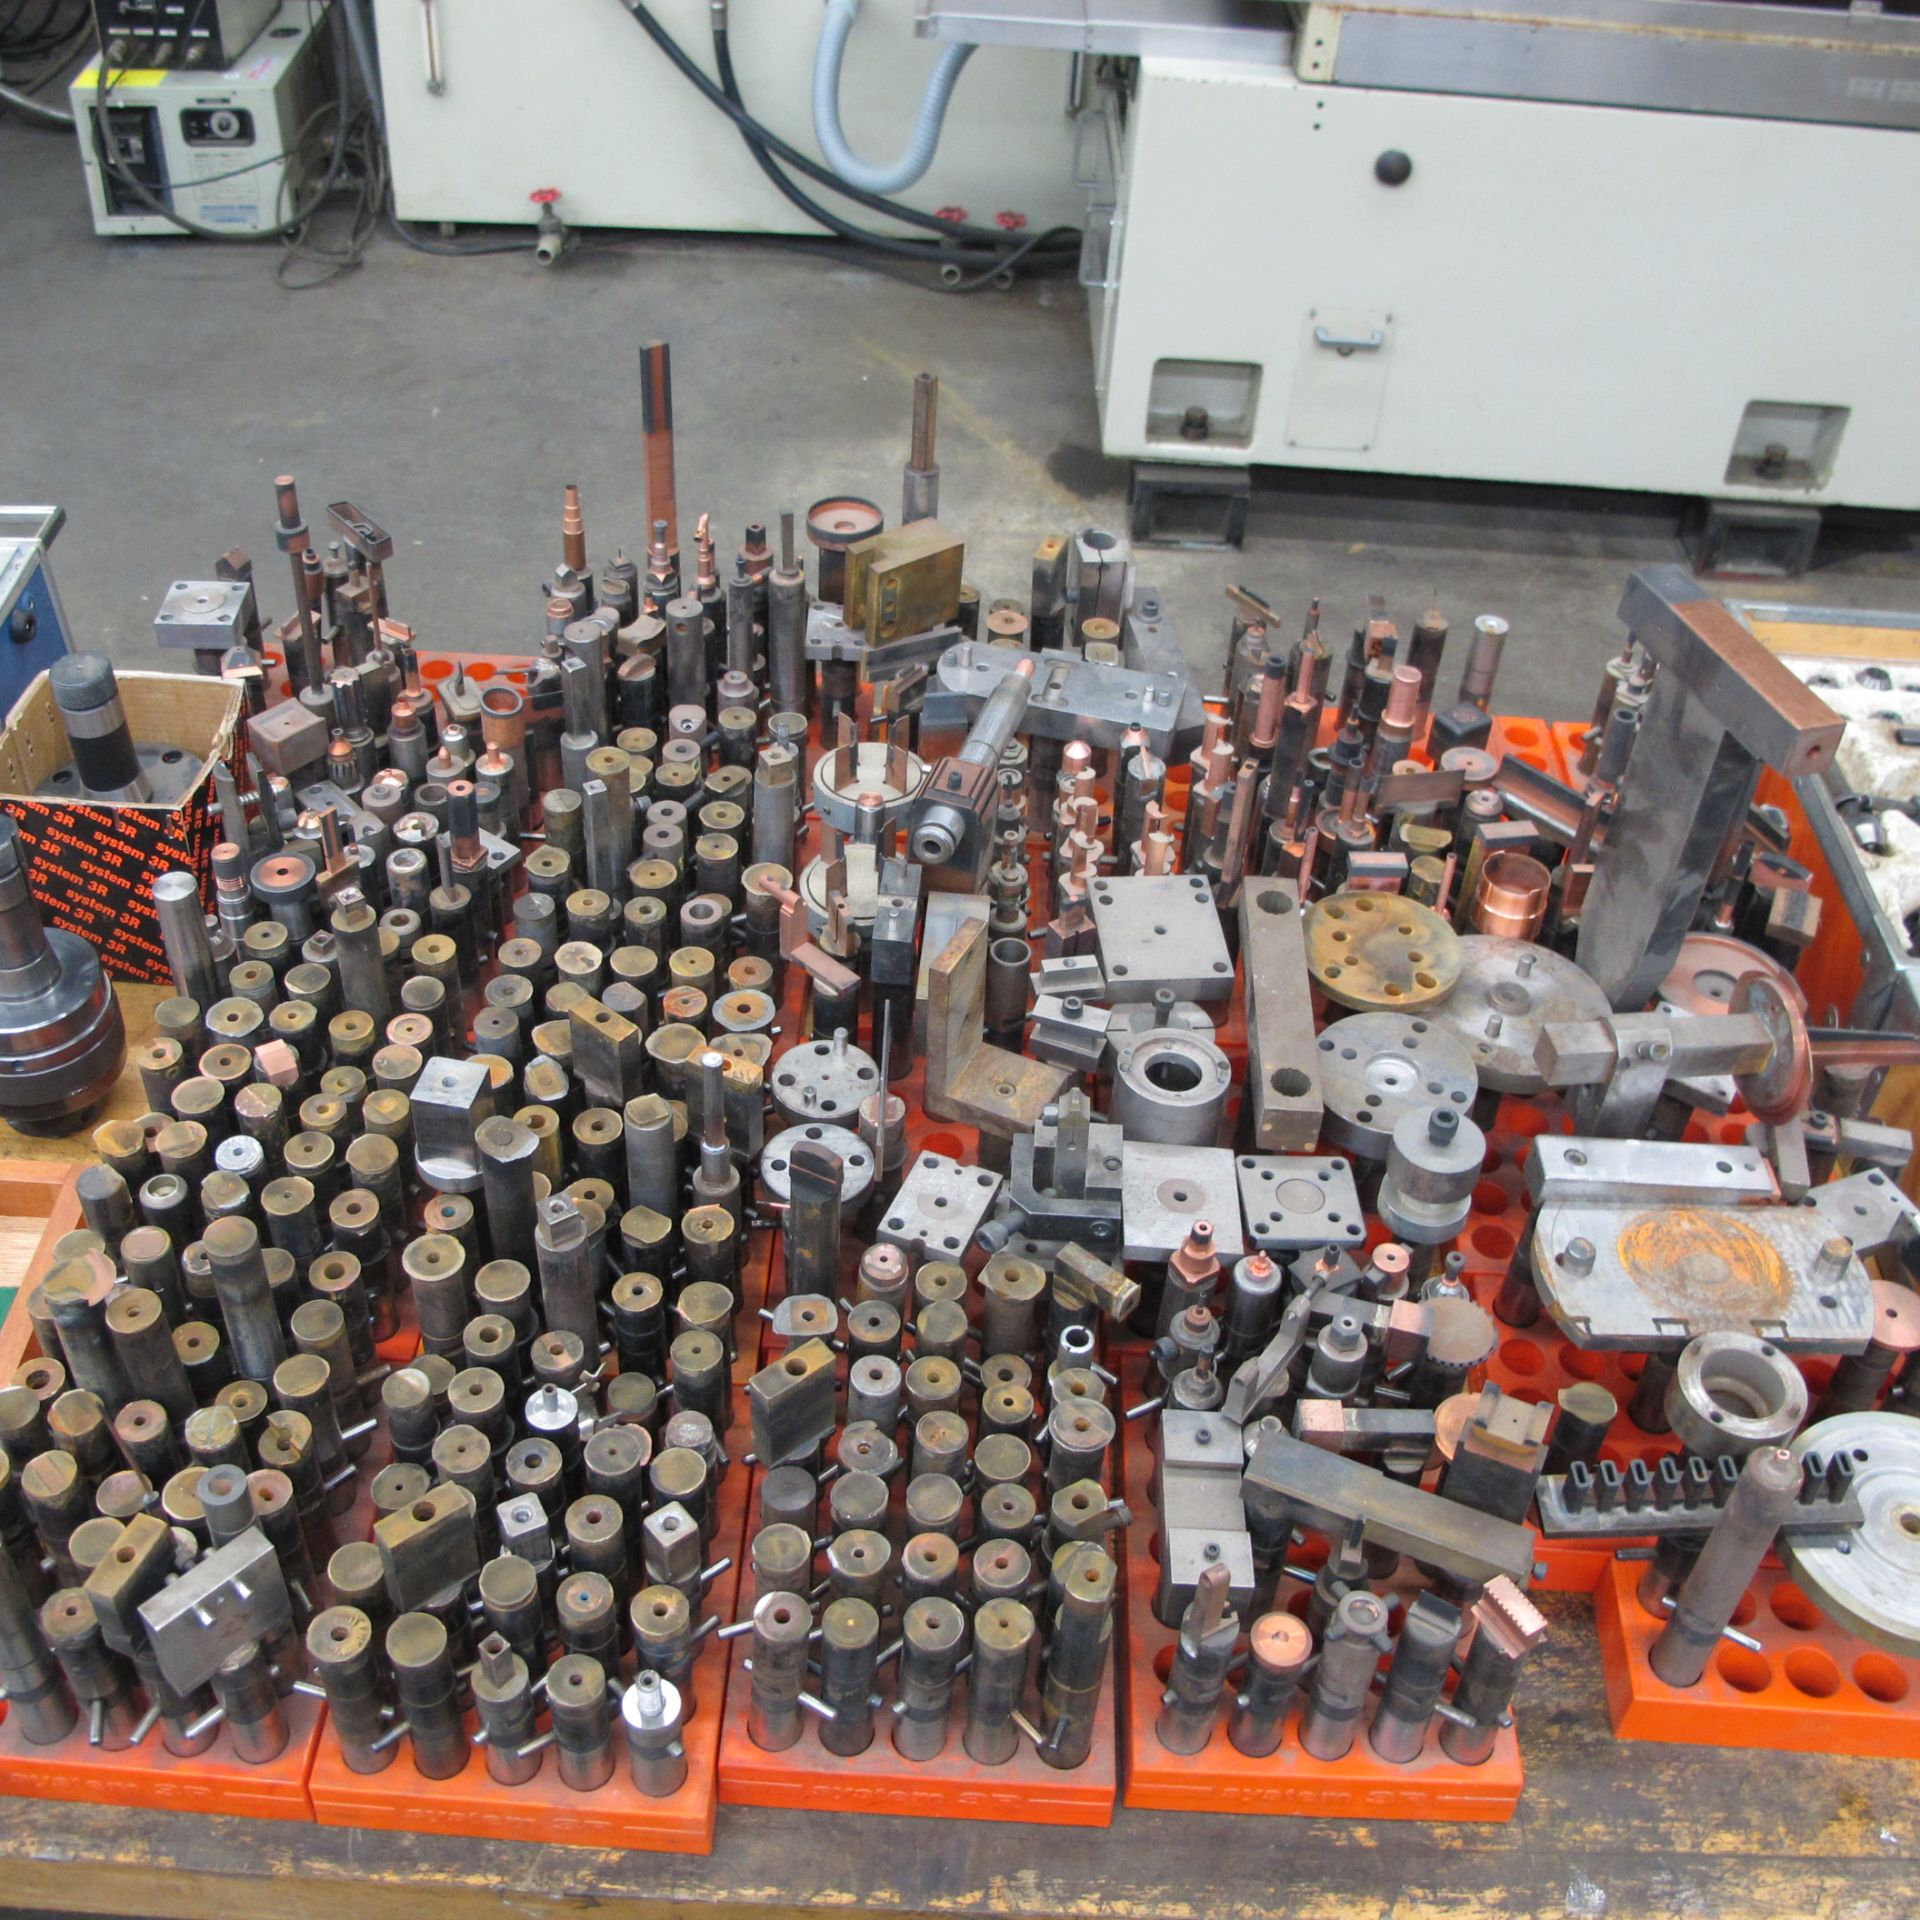 LOT OF SYSTEM R3 EDM BLOCKS, TRAYS, SPINDLES, SPEED CONTROLLER AND ELECTRODES - Image 4 of 6